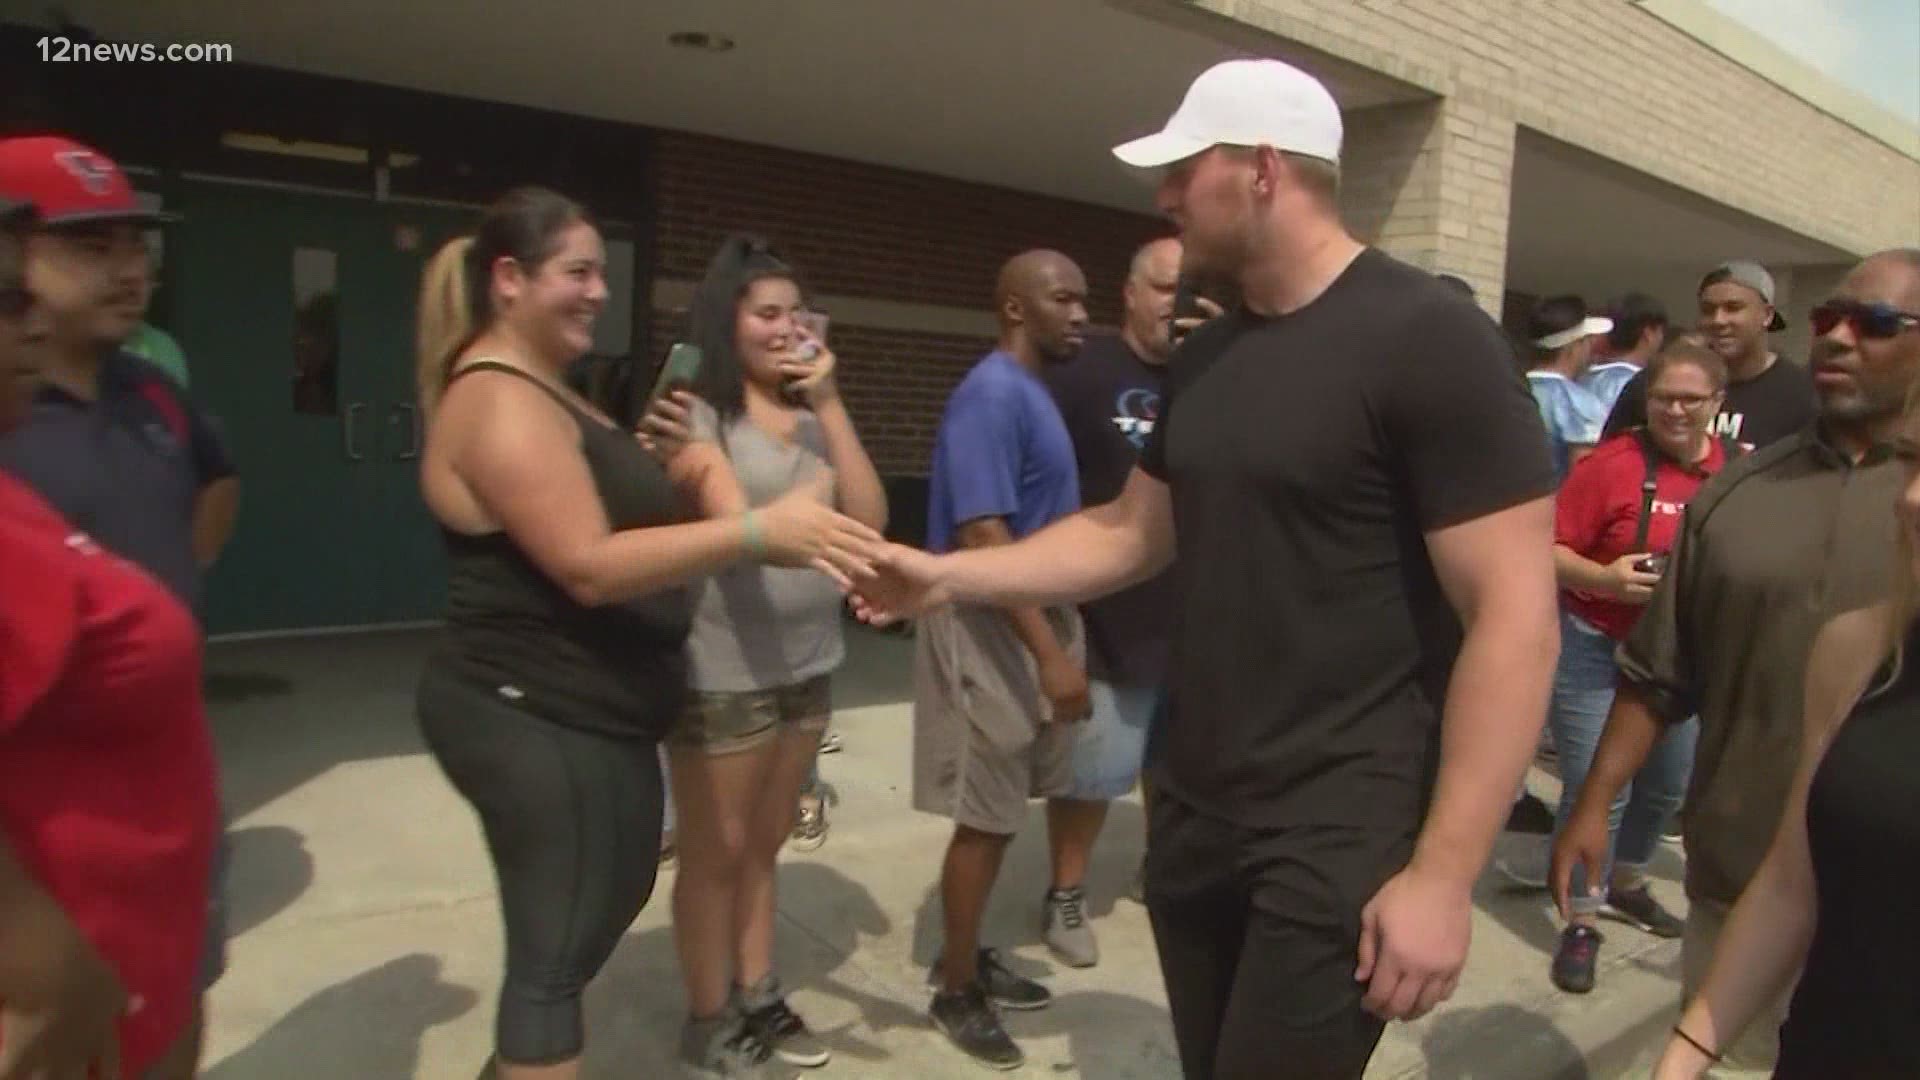 J.J. Watt is one of the most dominant forces on the football field, but he’s also made it a mission to help others.